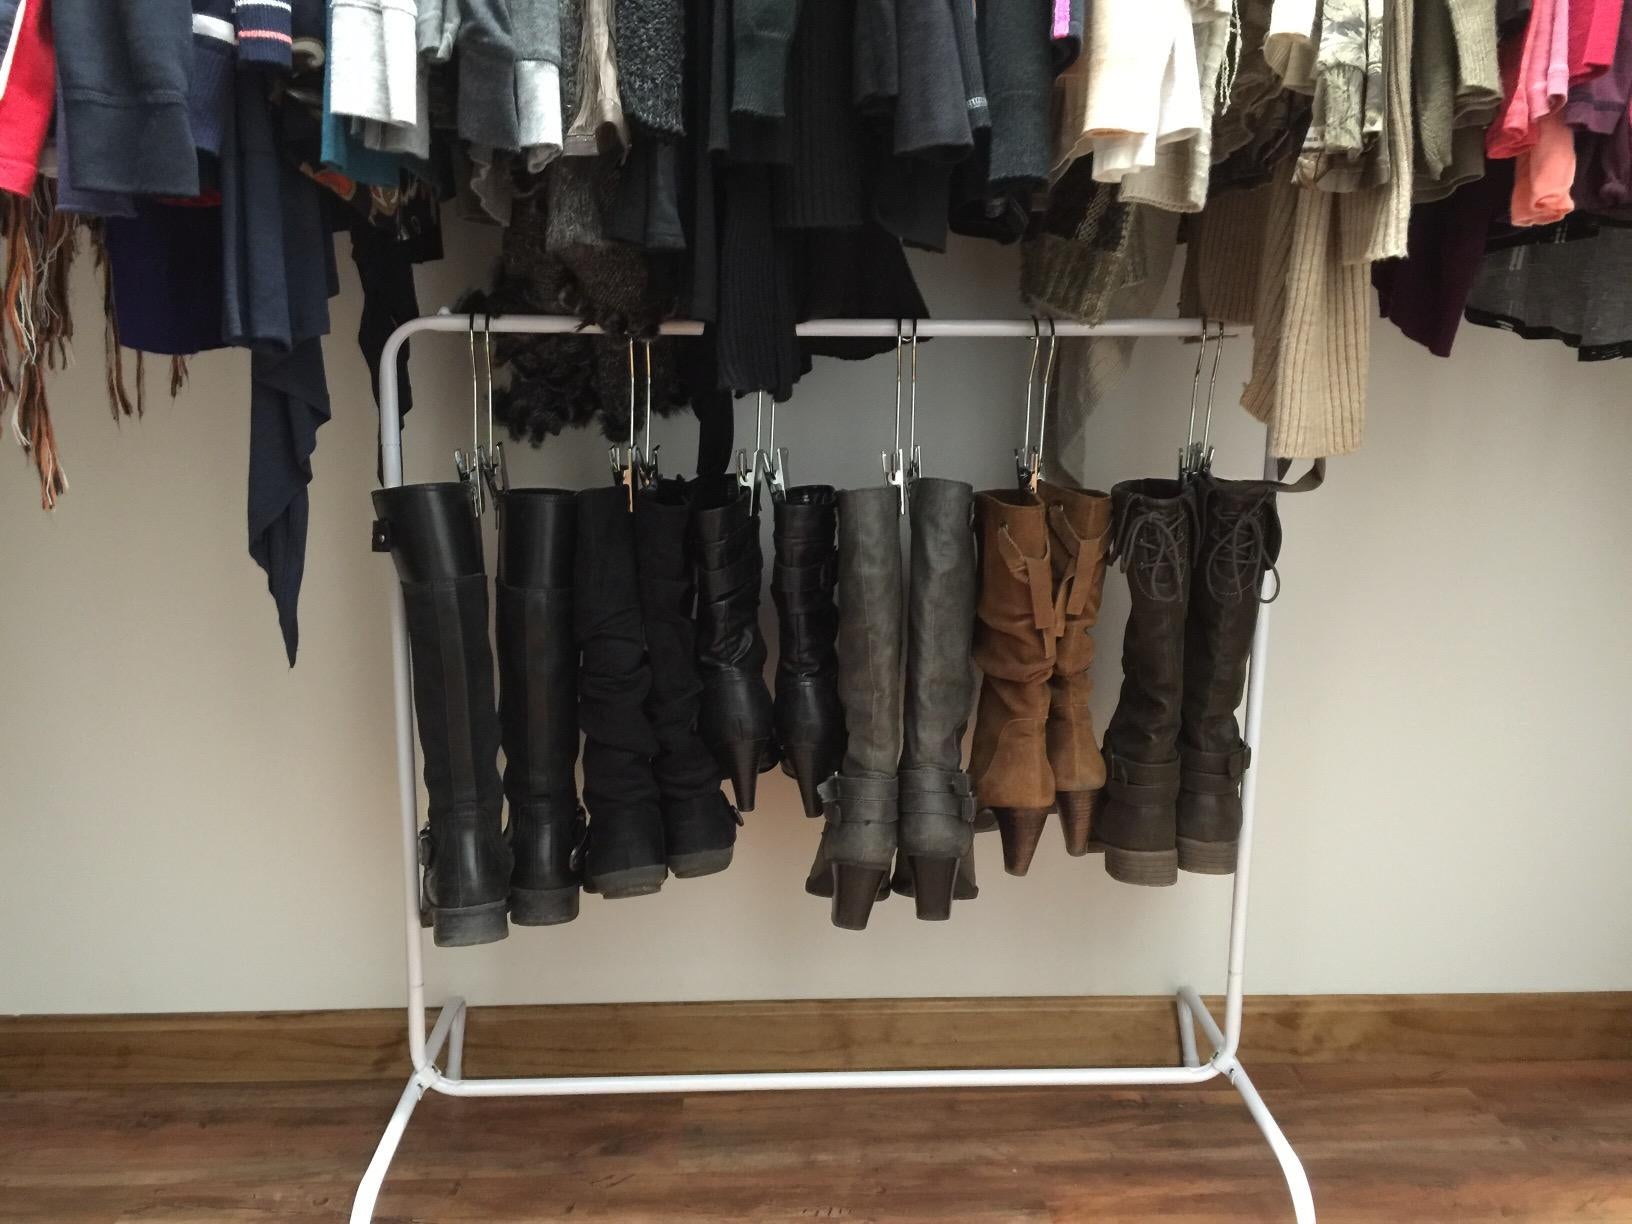 Boots hung up on organizing rack